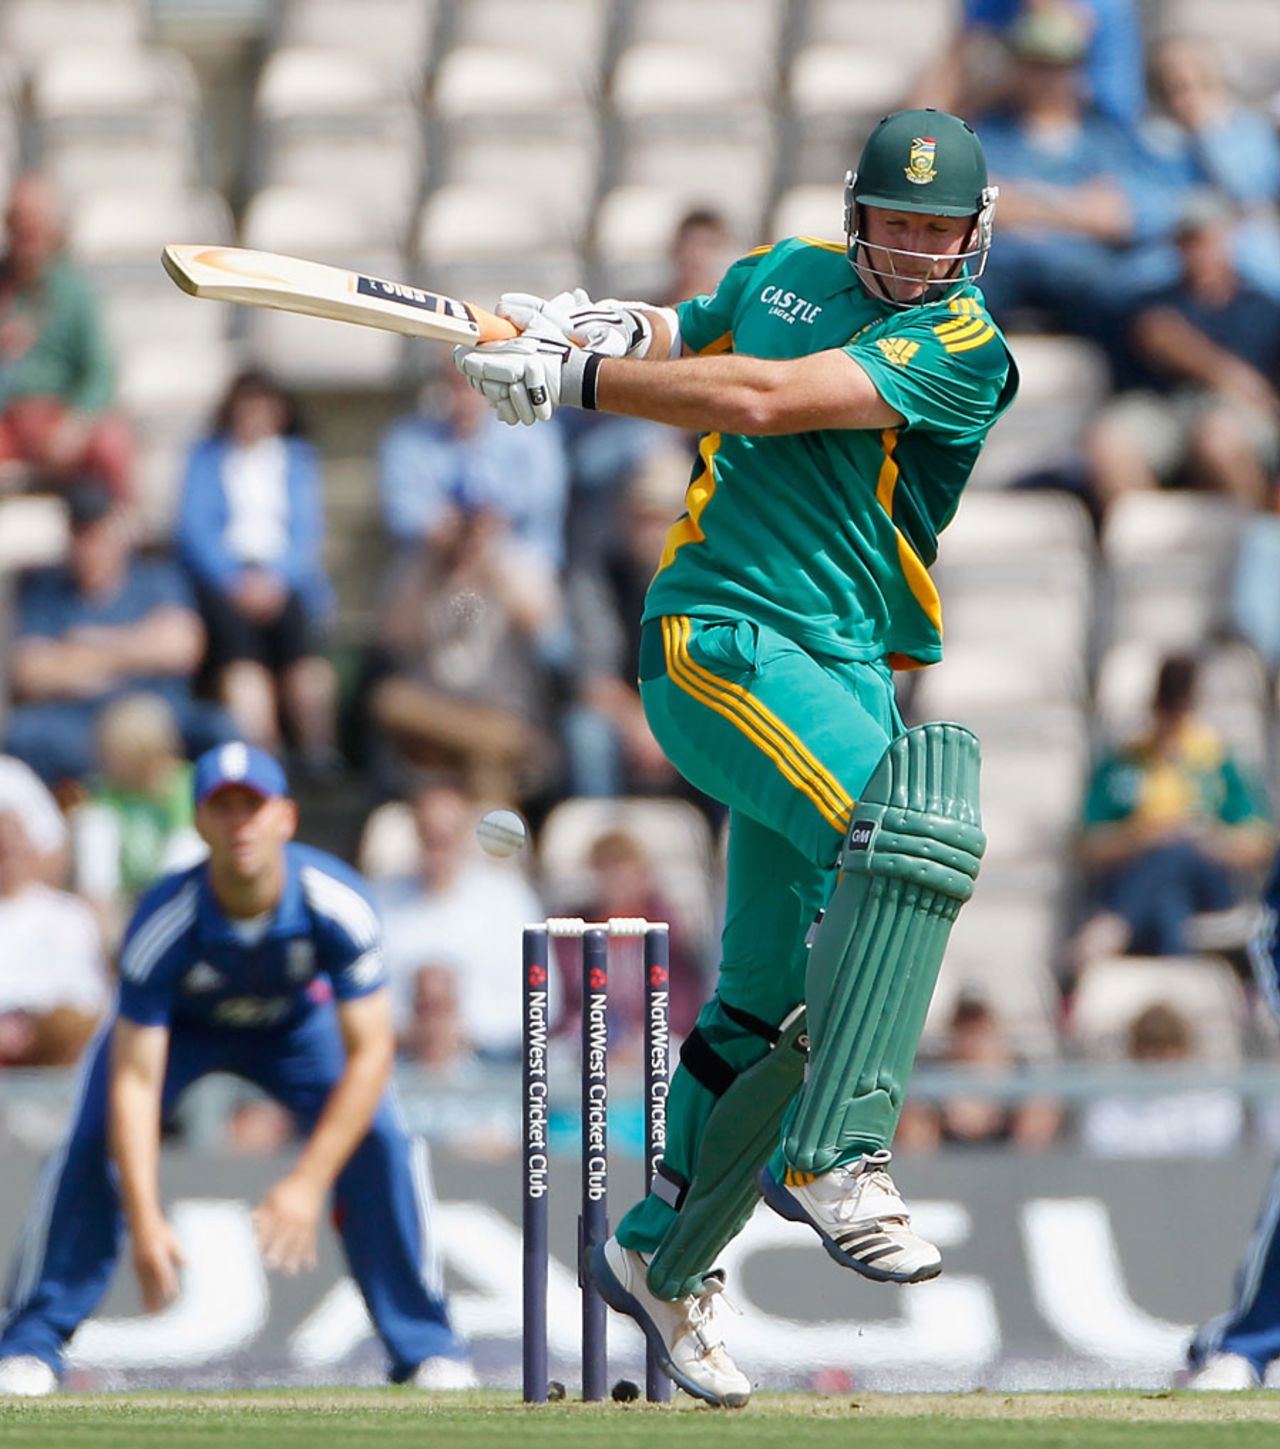 Graeme Smith pulls during his half-century, England v South Africa, 2nd NatWest ODI, West End, August 28, 2012